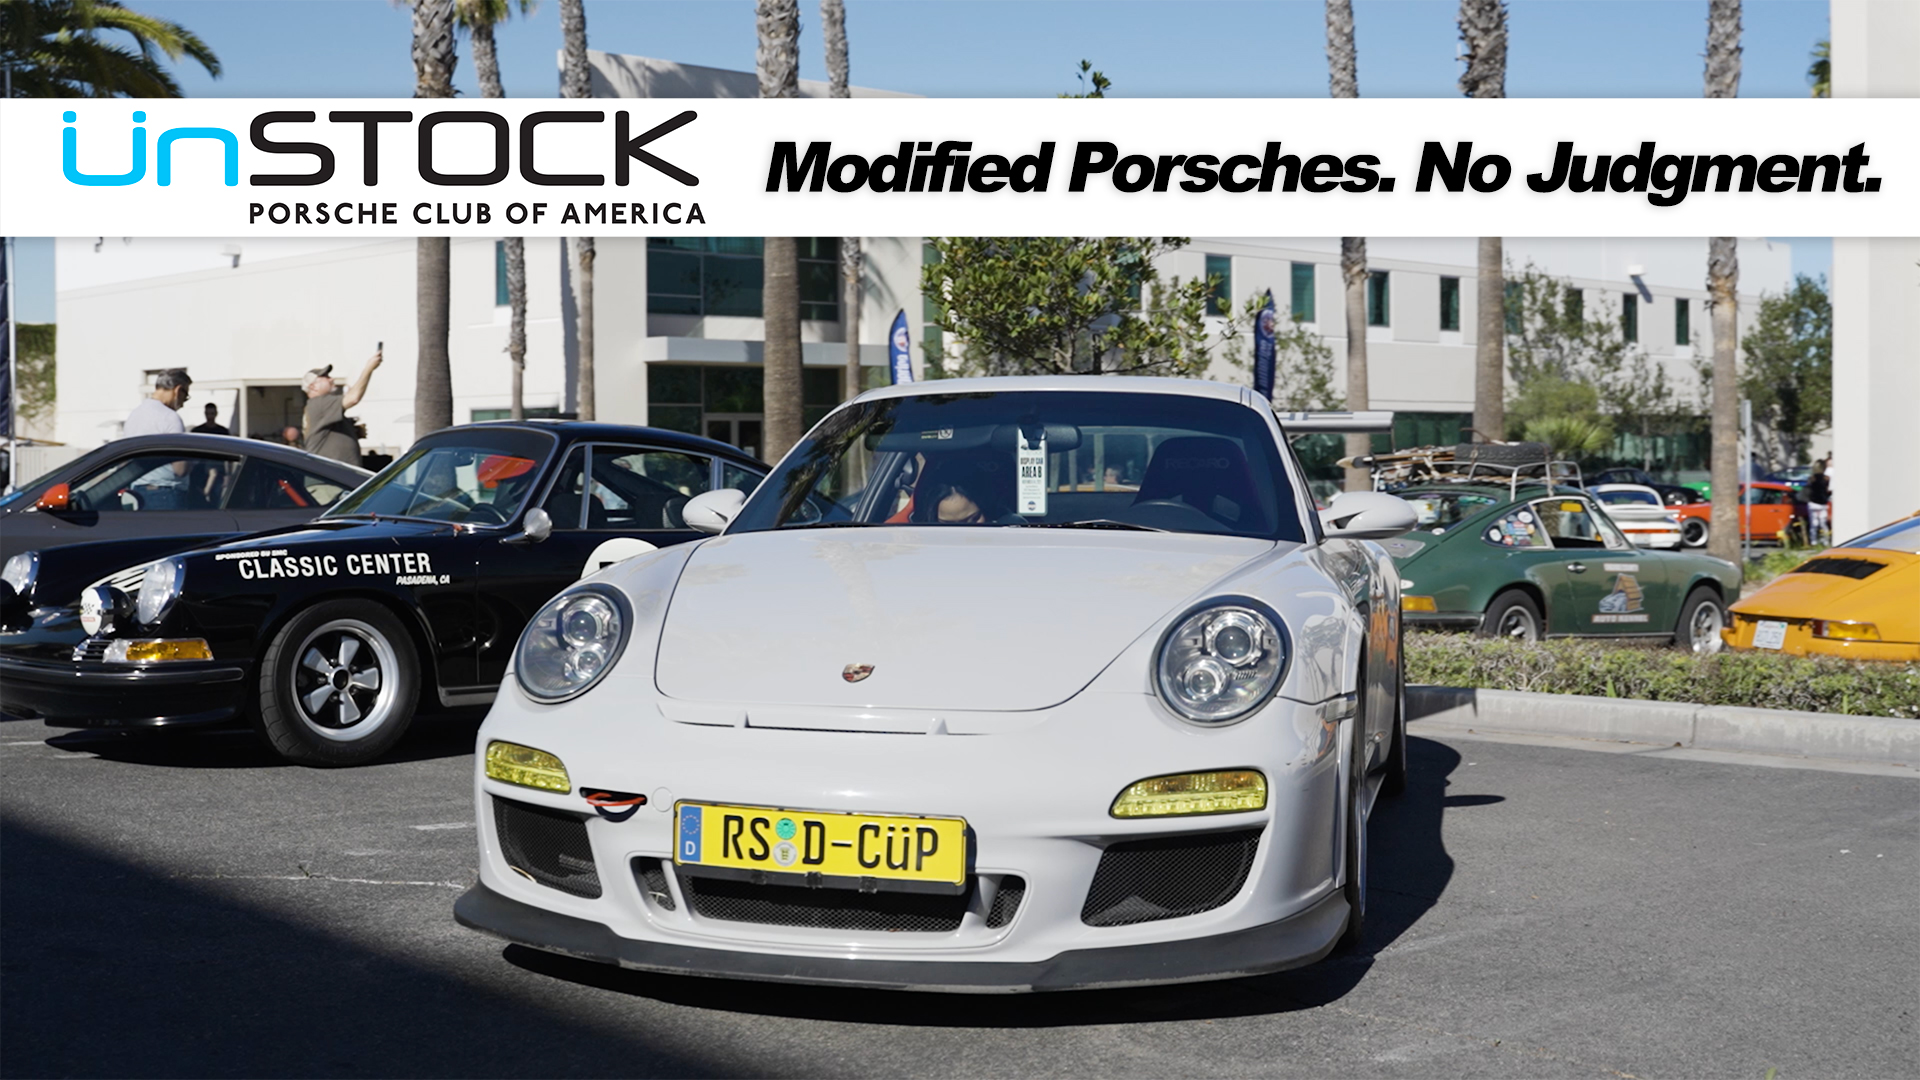 photo of Video: ÜnStock: Modified Porsches. No Judgment. image